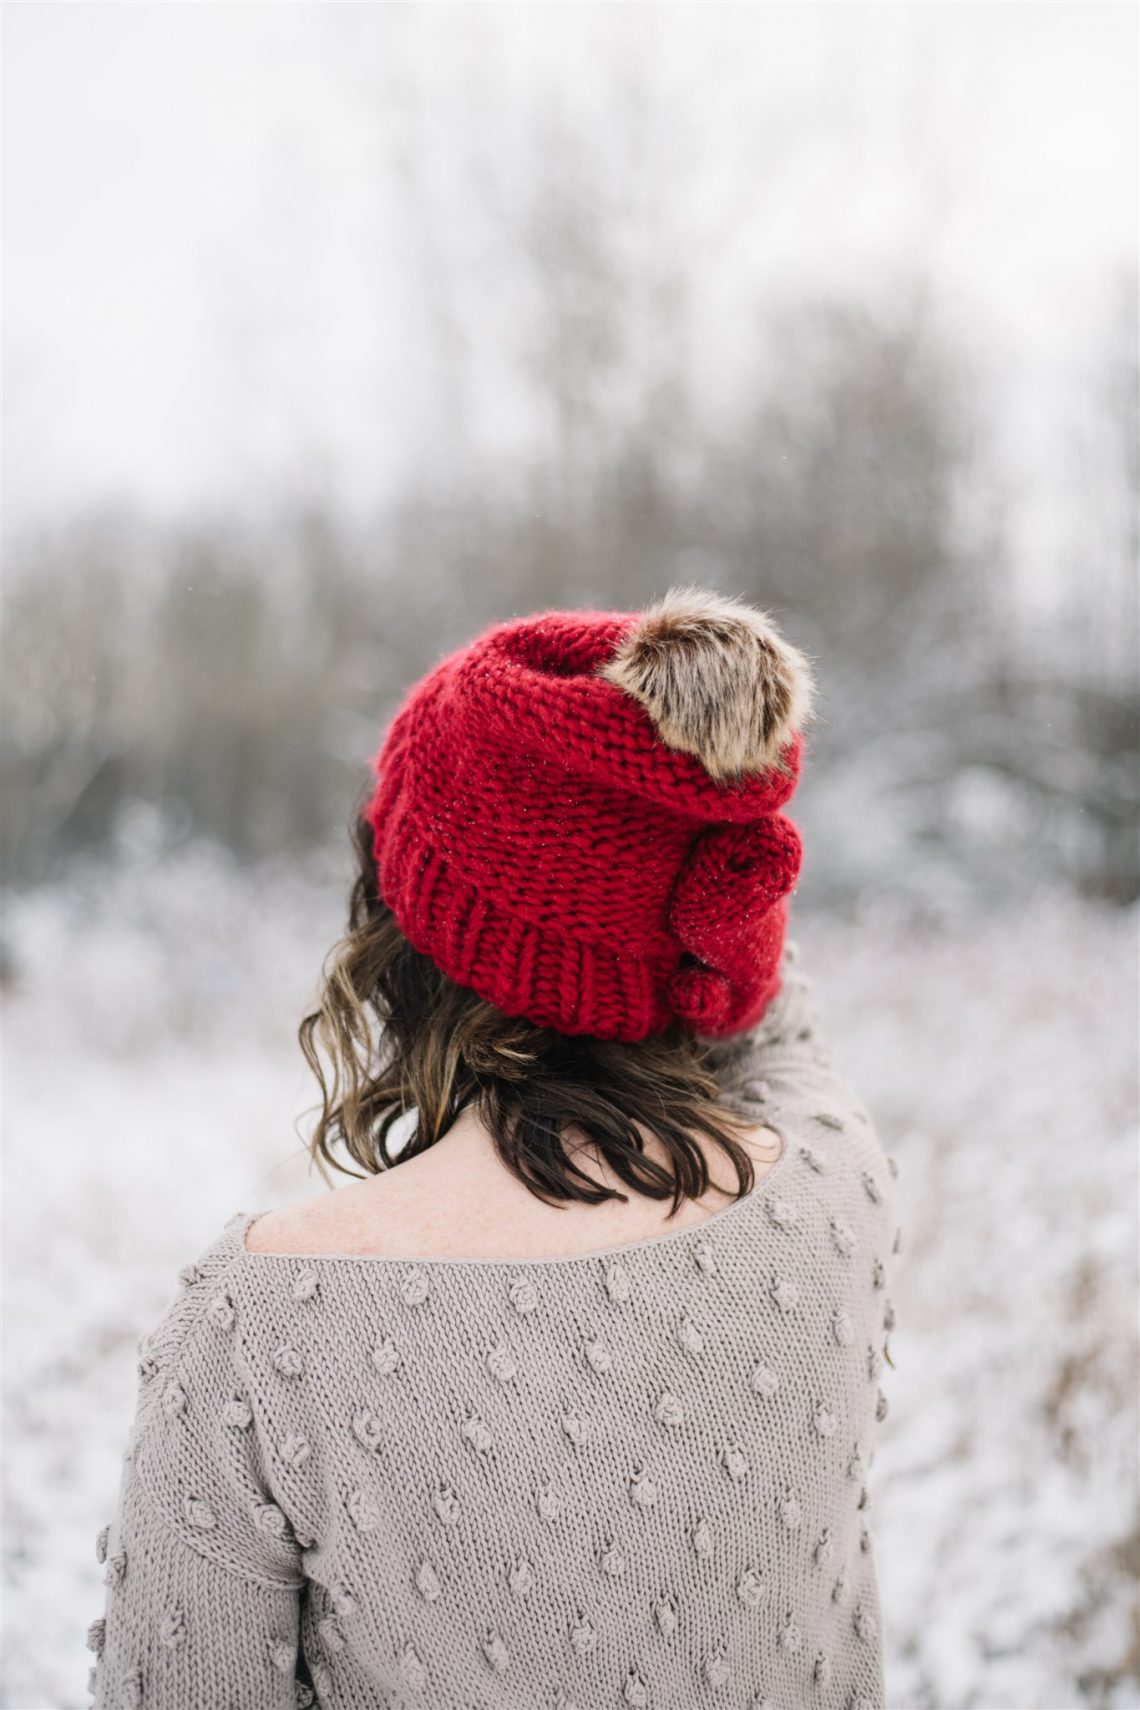 Free Knitting Pattern! This chunky knit hat and mittens is quick to make and would be a beautiful Christmas gift 